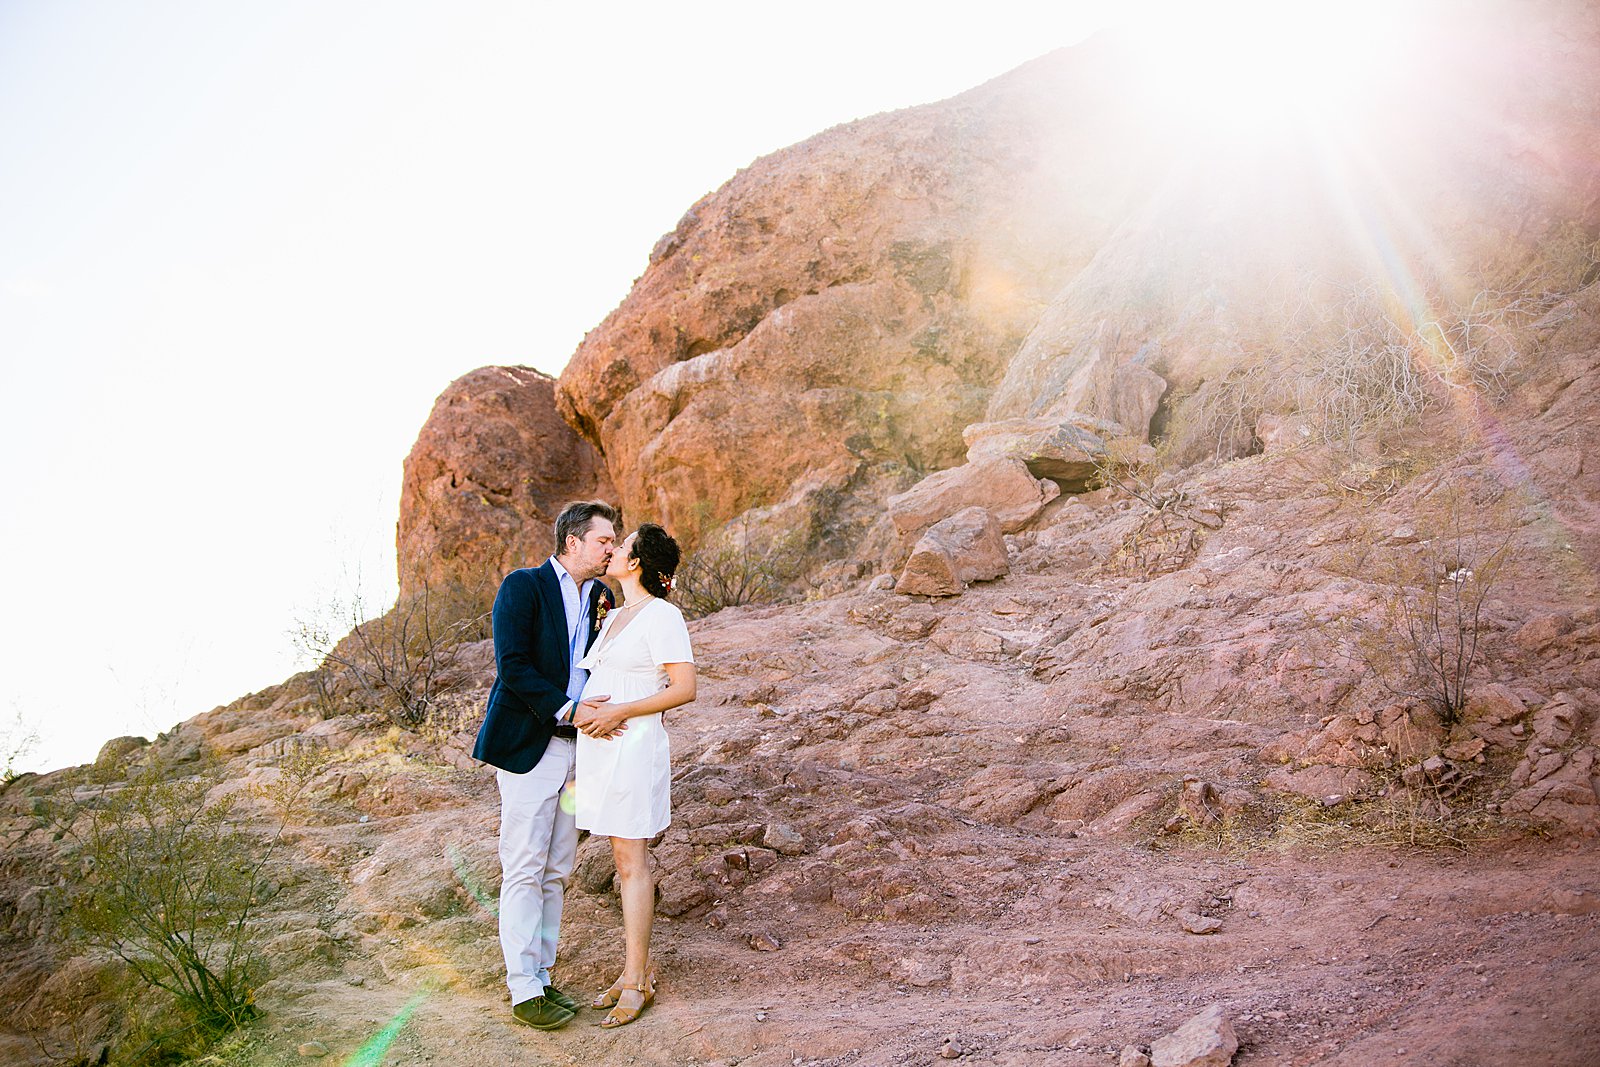 Bride and Groom share a kiss during their Papago Park elopement by Arizona elopement photographer PMA Photography.